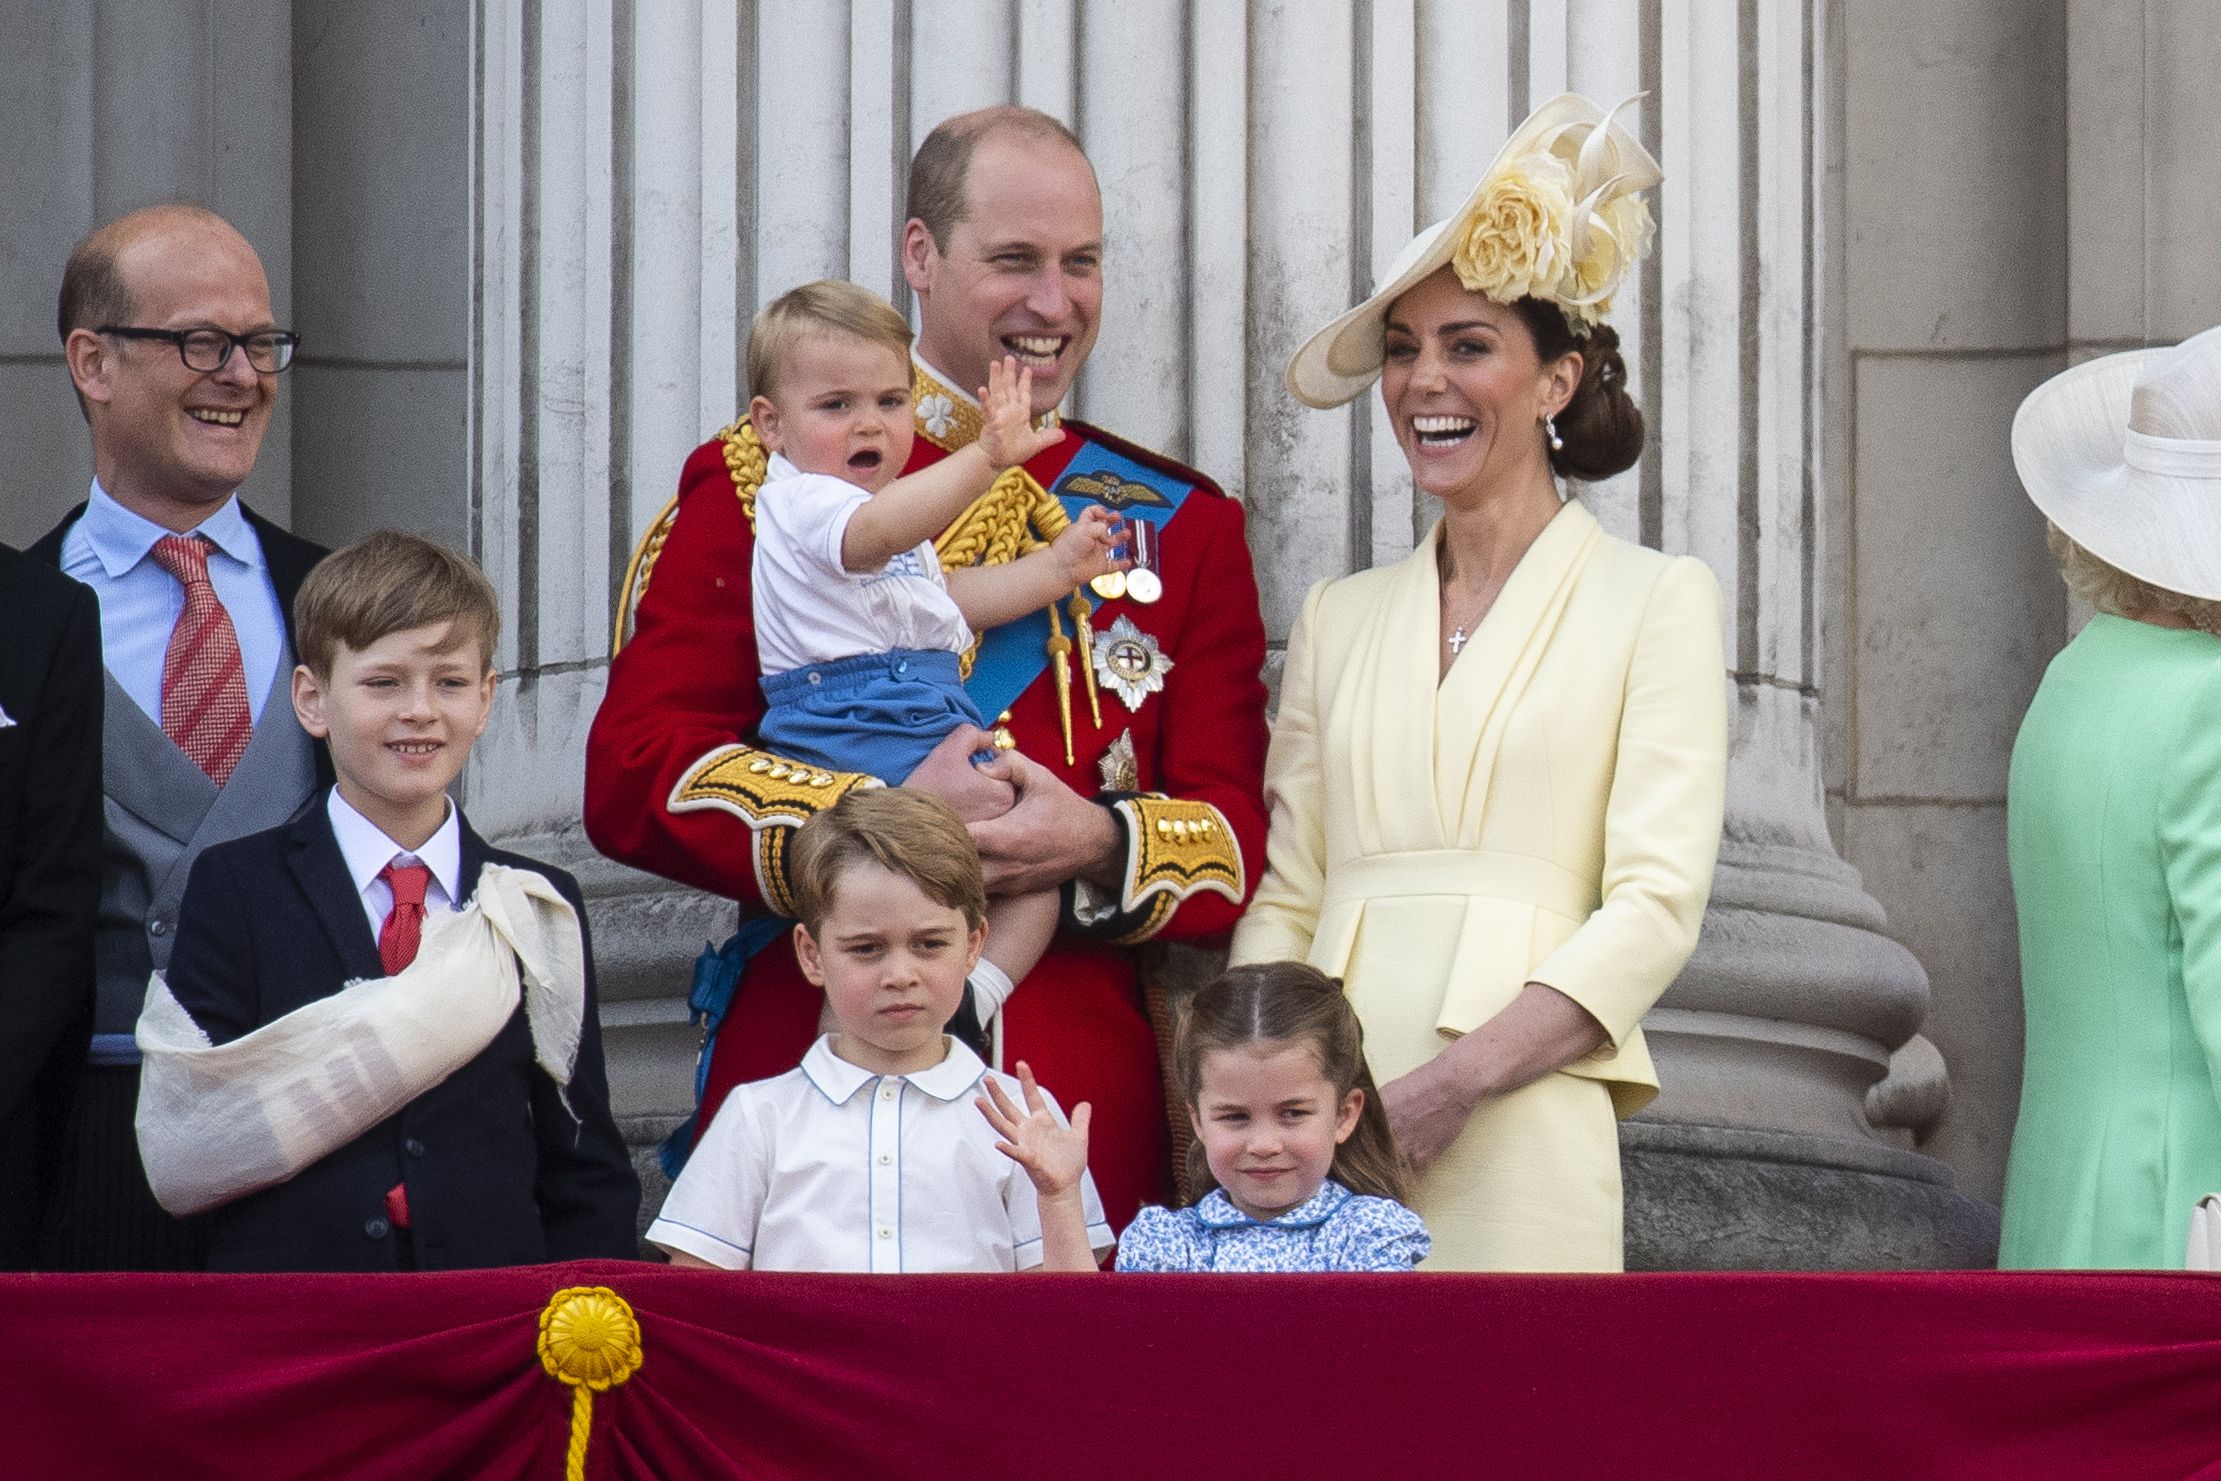 The Royals Love to Video Chat with Prince George, Princess Charlotte & Prince Louis